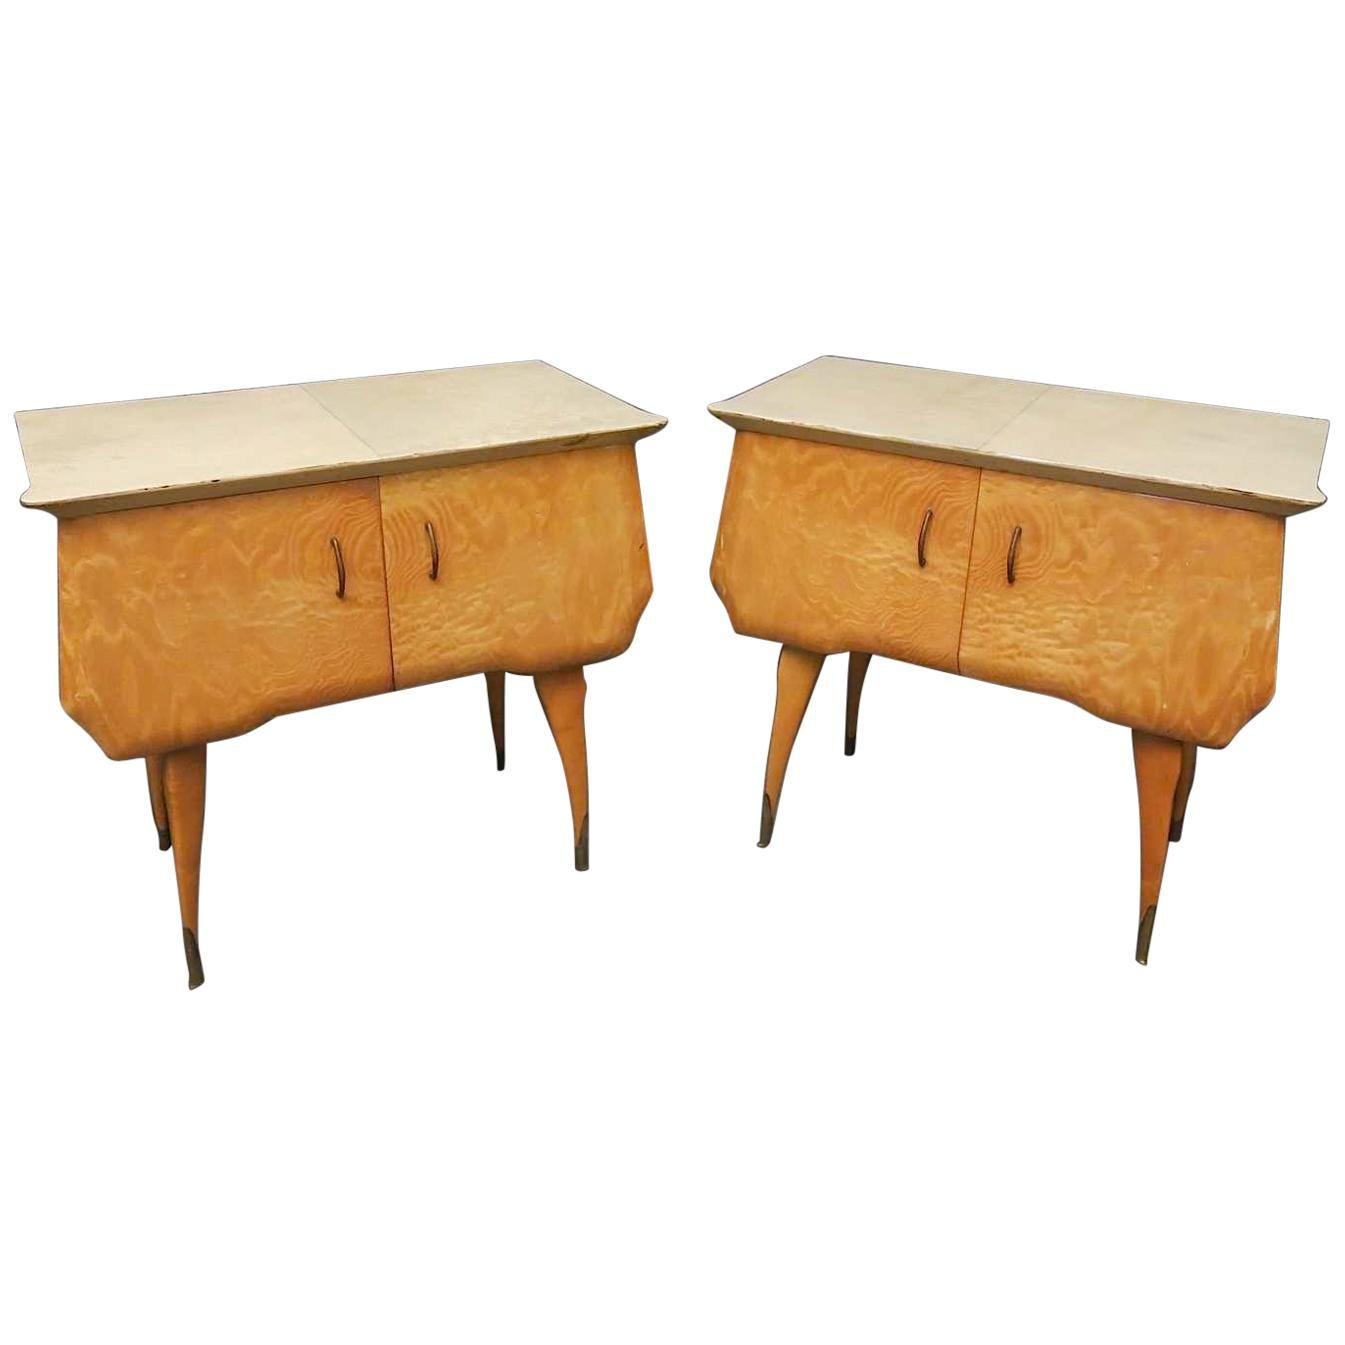 Pair of Midcentury Maple and Parchment Italian Bedside Tables, 1950